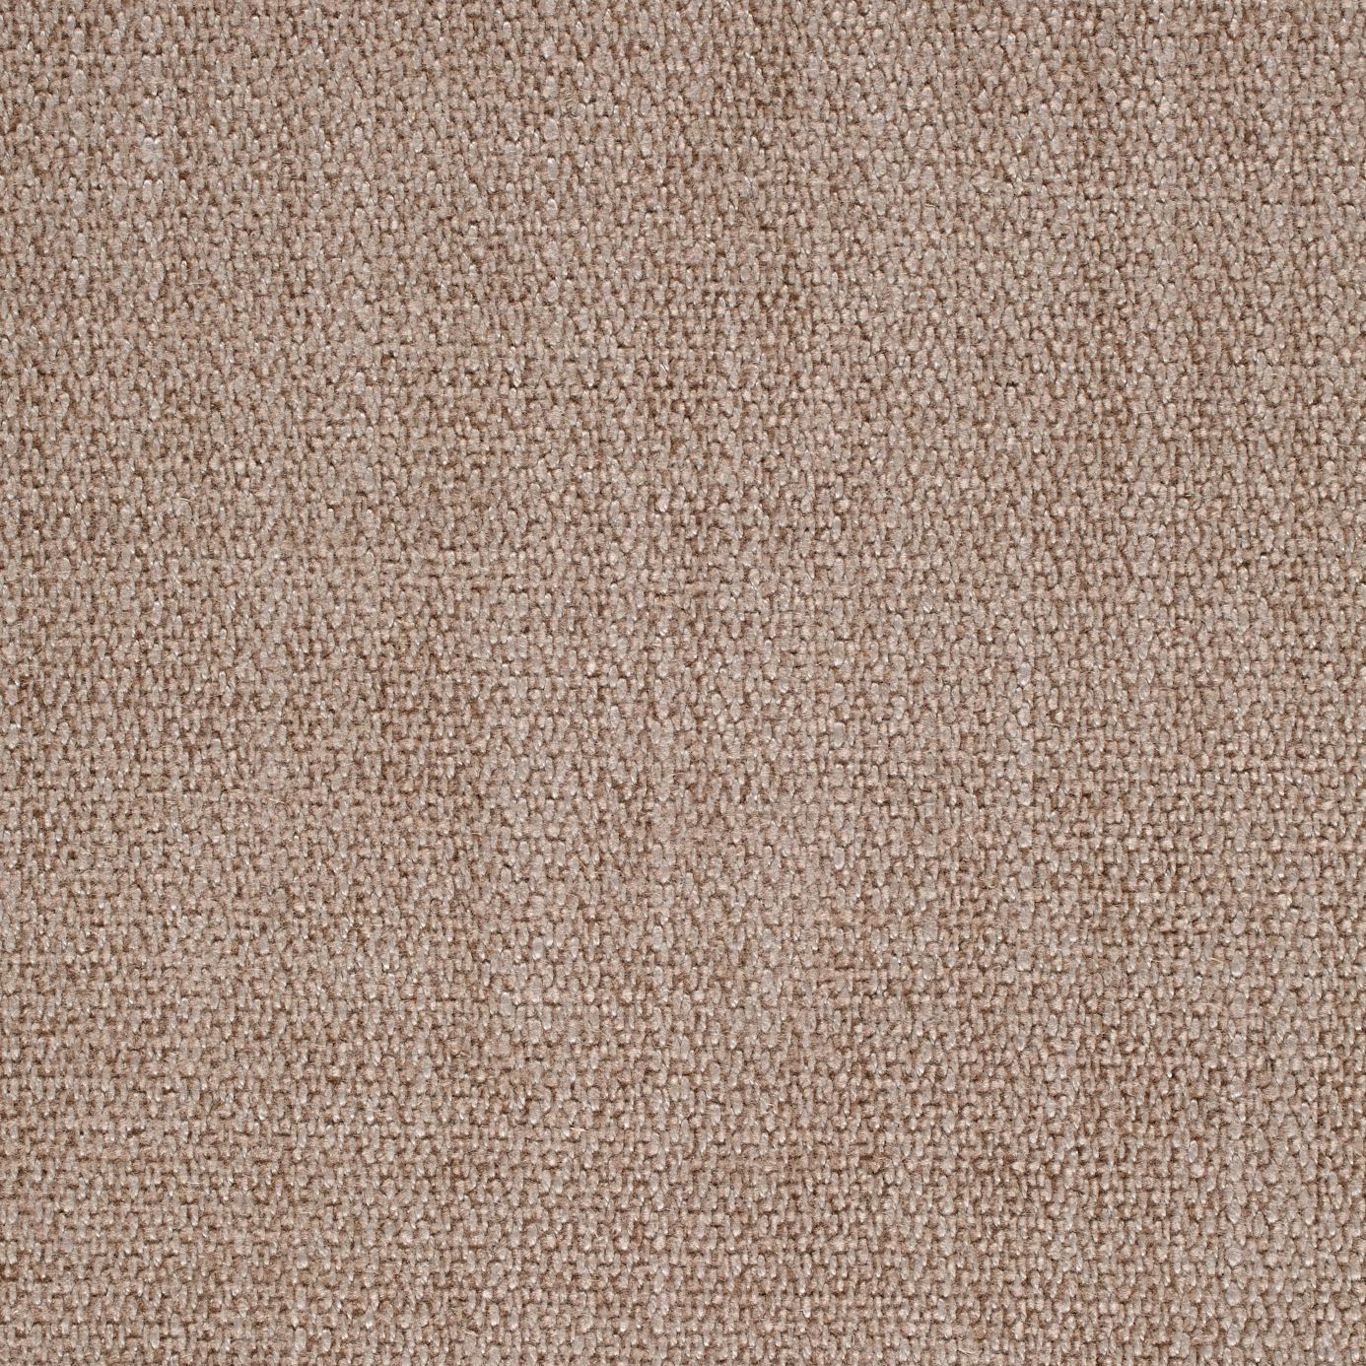 Audley Suede Fabric by ZOF